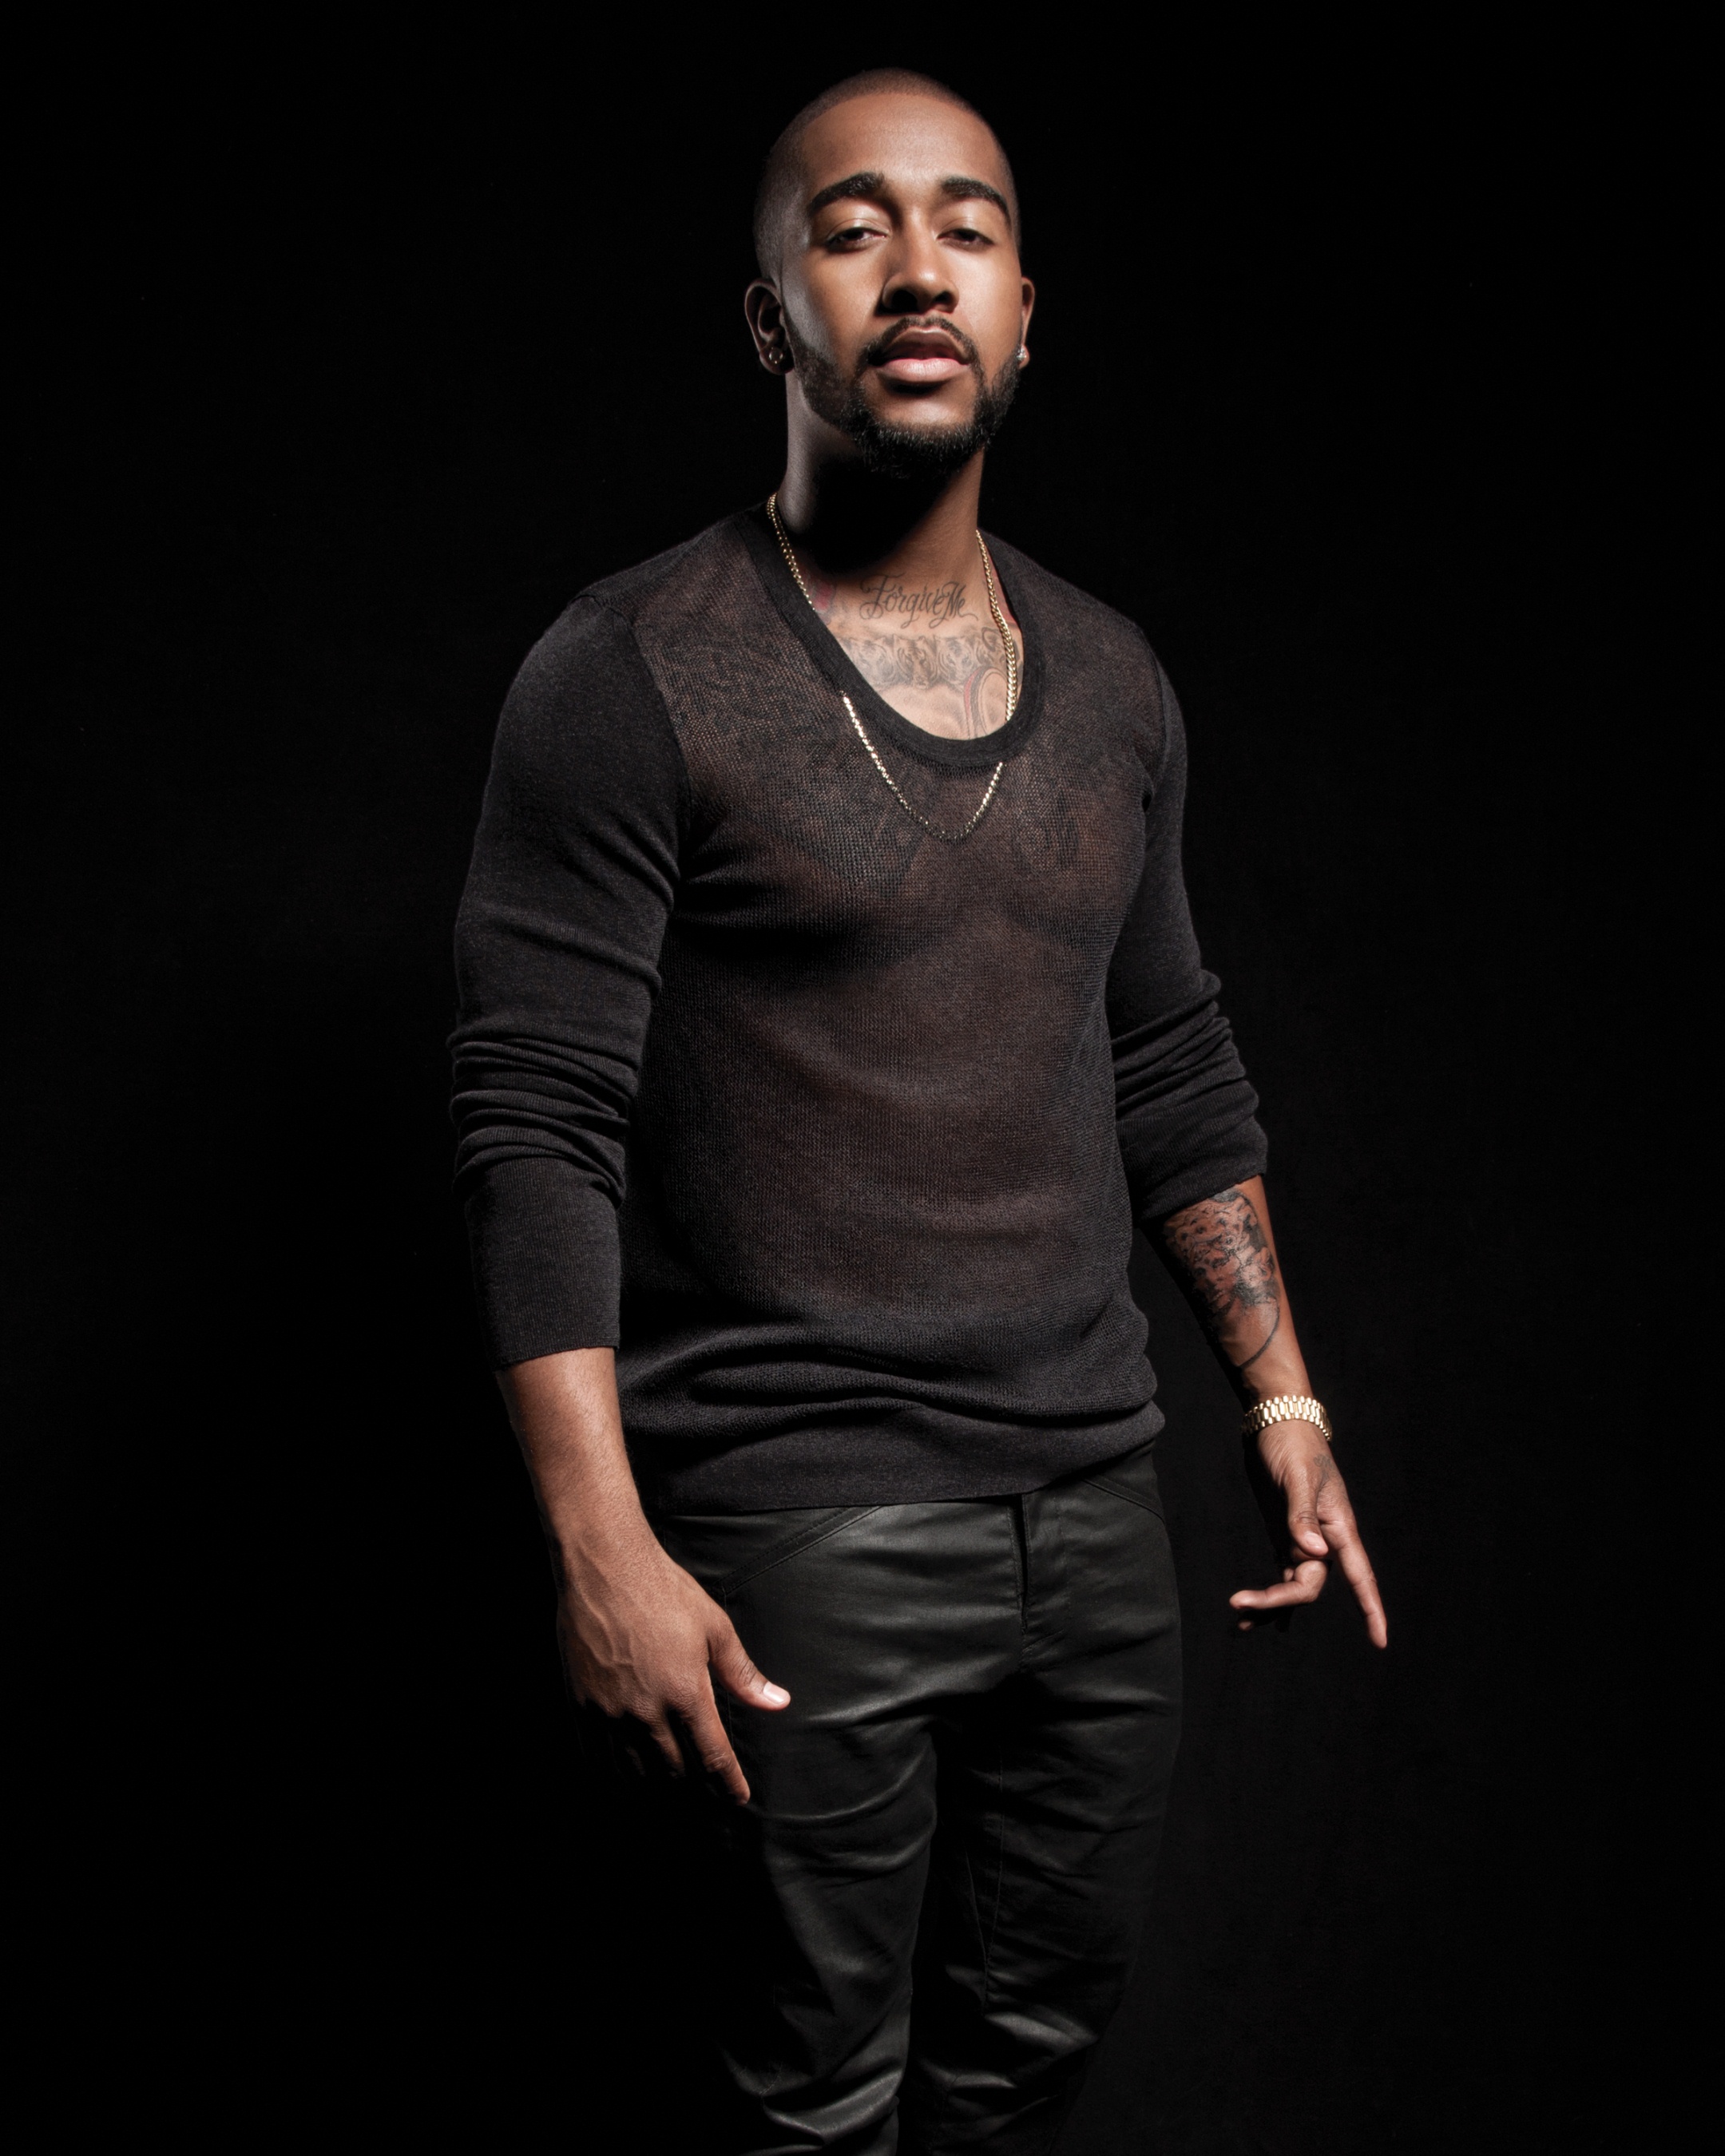 Amazing Omarion Pictures & Backgrounds